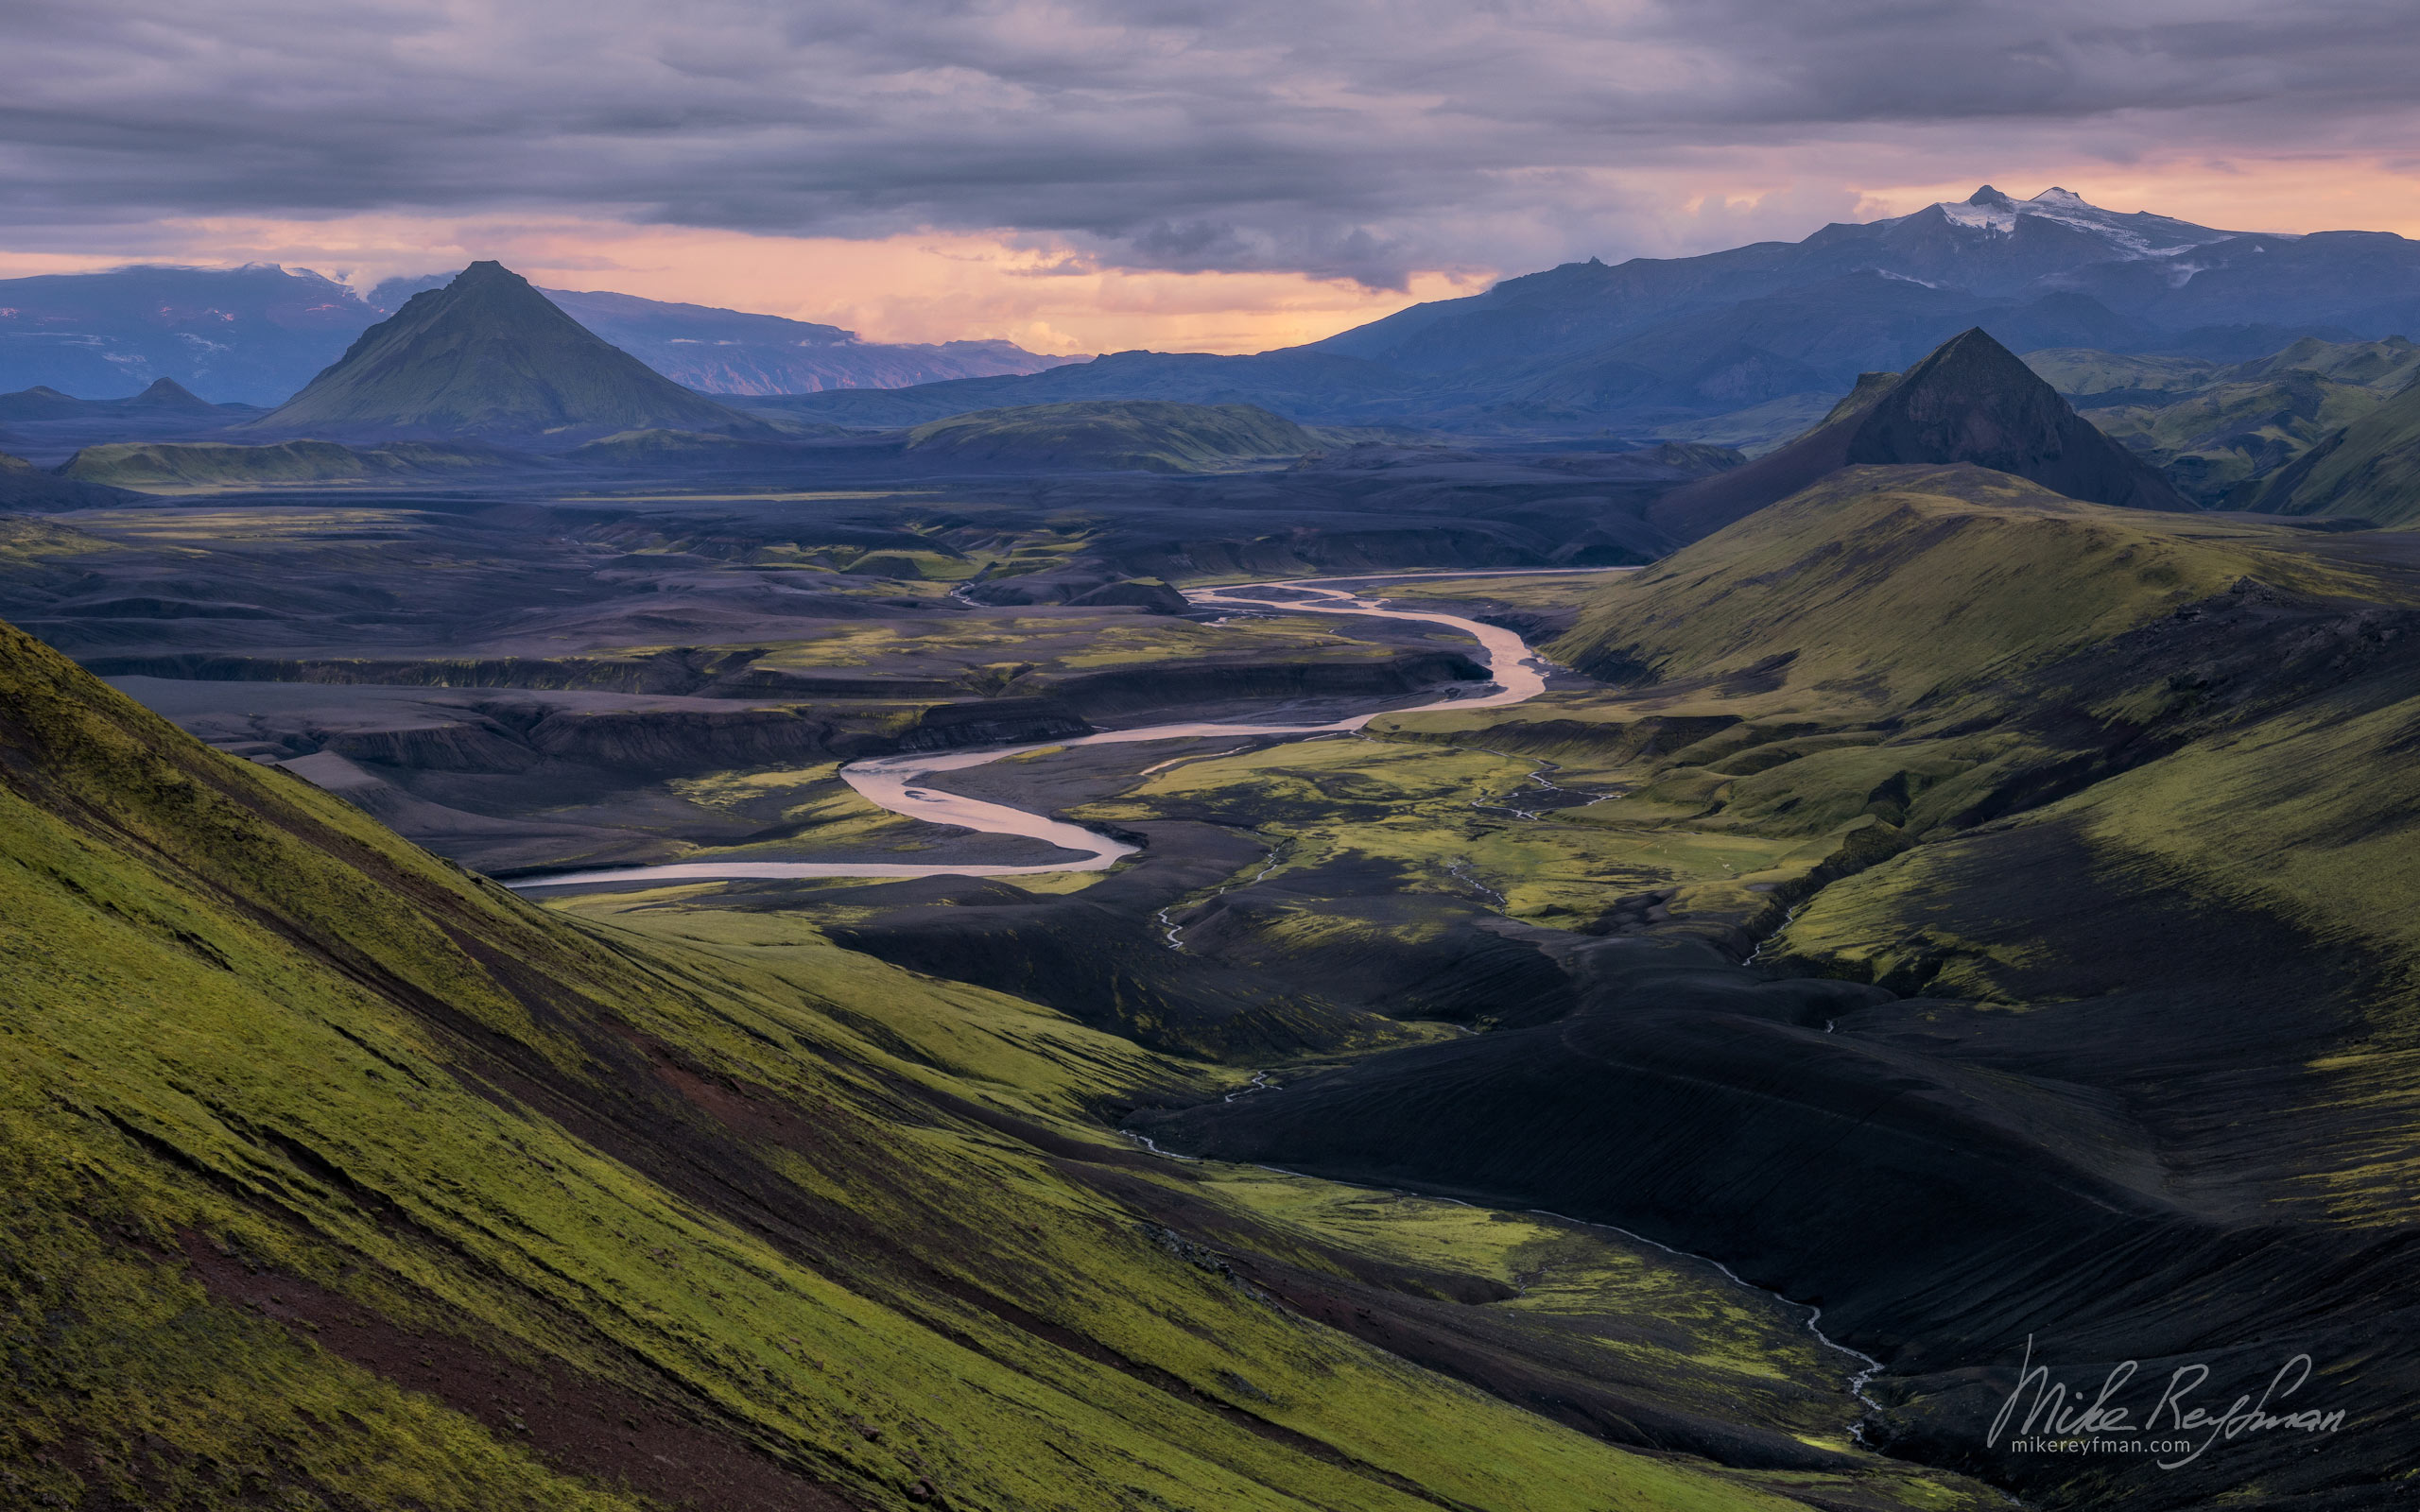 Mount Storasula and Mount Maelifell view from the slope of Mount Bratthals. Southern Fjallabak, Iceland. 132-IC-GP _O3X2974 - Rhyolite Mountains, Crater Lakes, Geothermal Areas, Lava Fields and Glacial Rivers. Iceland.  - Mike Reyfman Photography